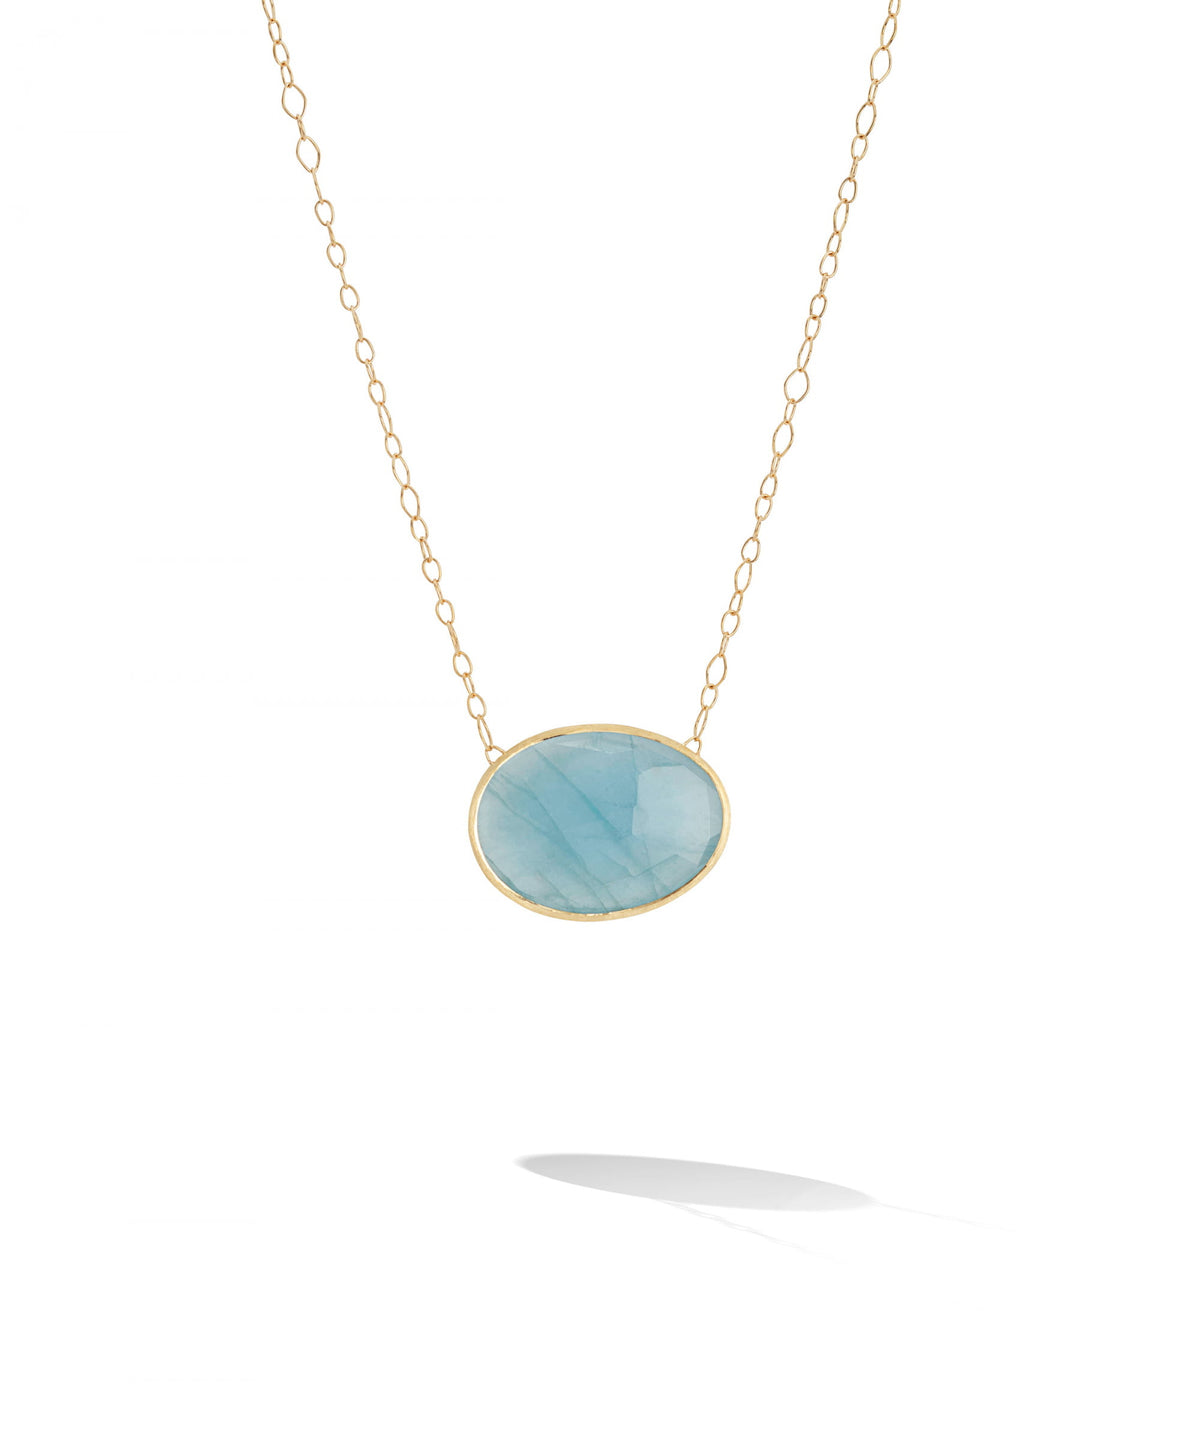 Lunaria Necklace in 18k Yellow Gold with Aquamarine Pendant - Orsini Jewellers NZ